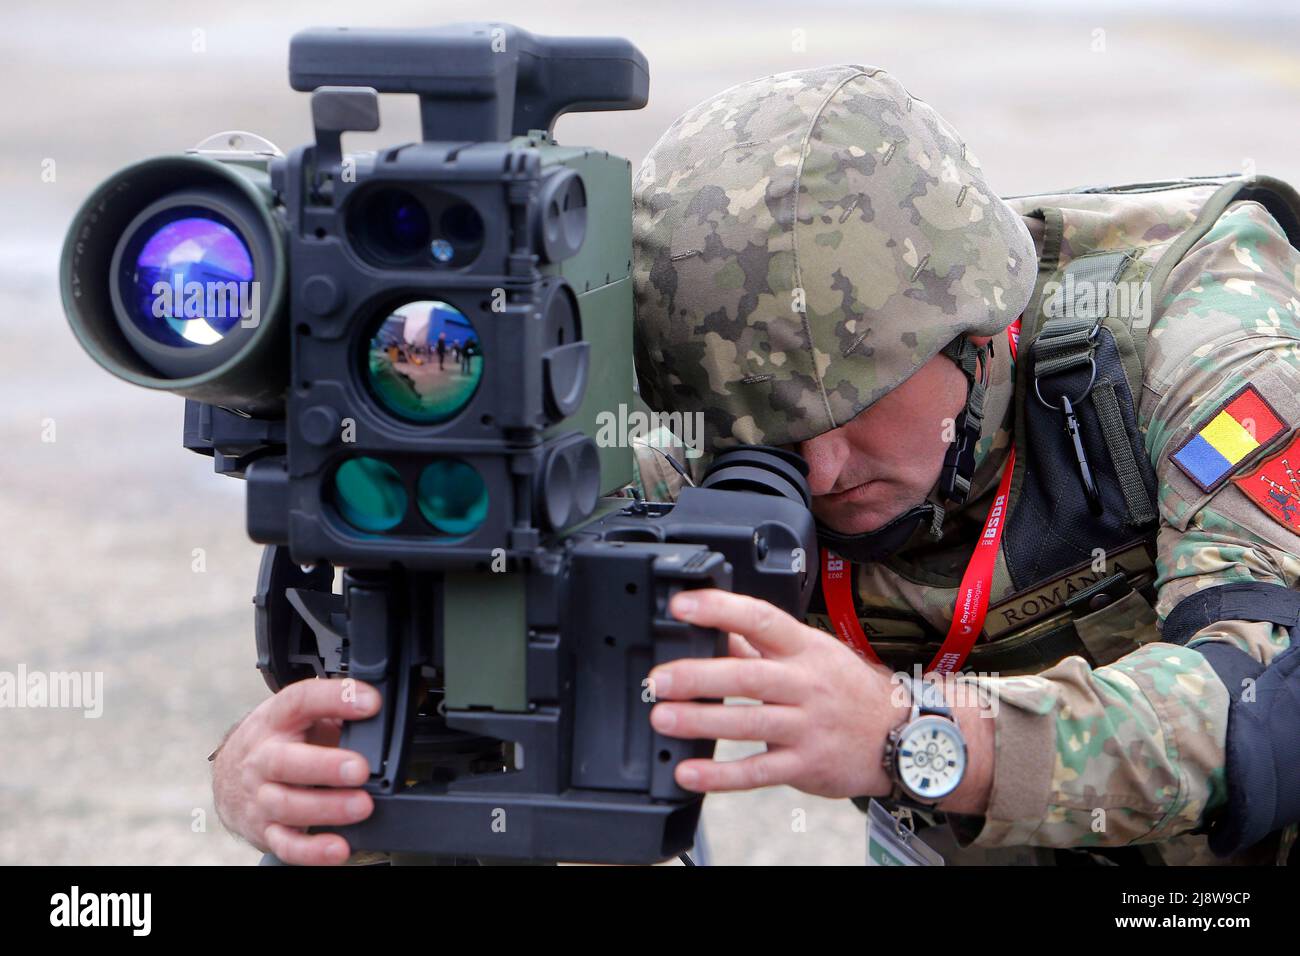 Bucharest, Romania. 18th May, 2022. A soldier looks through the guidance system of a missile launcher at the Black Sea Defense and Aerospace Exhibition in Bucharest, capital of Romania, on May 18, 2022. Credit: Cristian Cristel/Xinhua/Alamy Live News Stock Photo